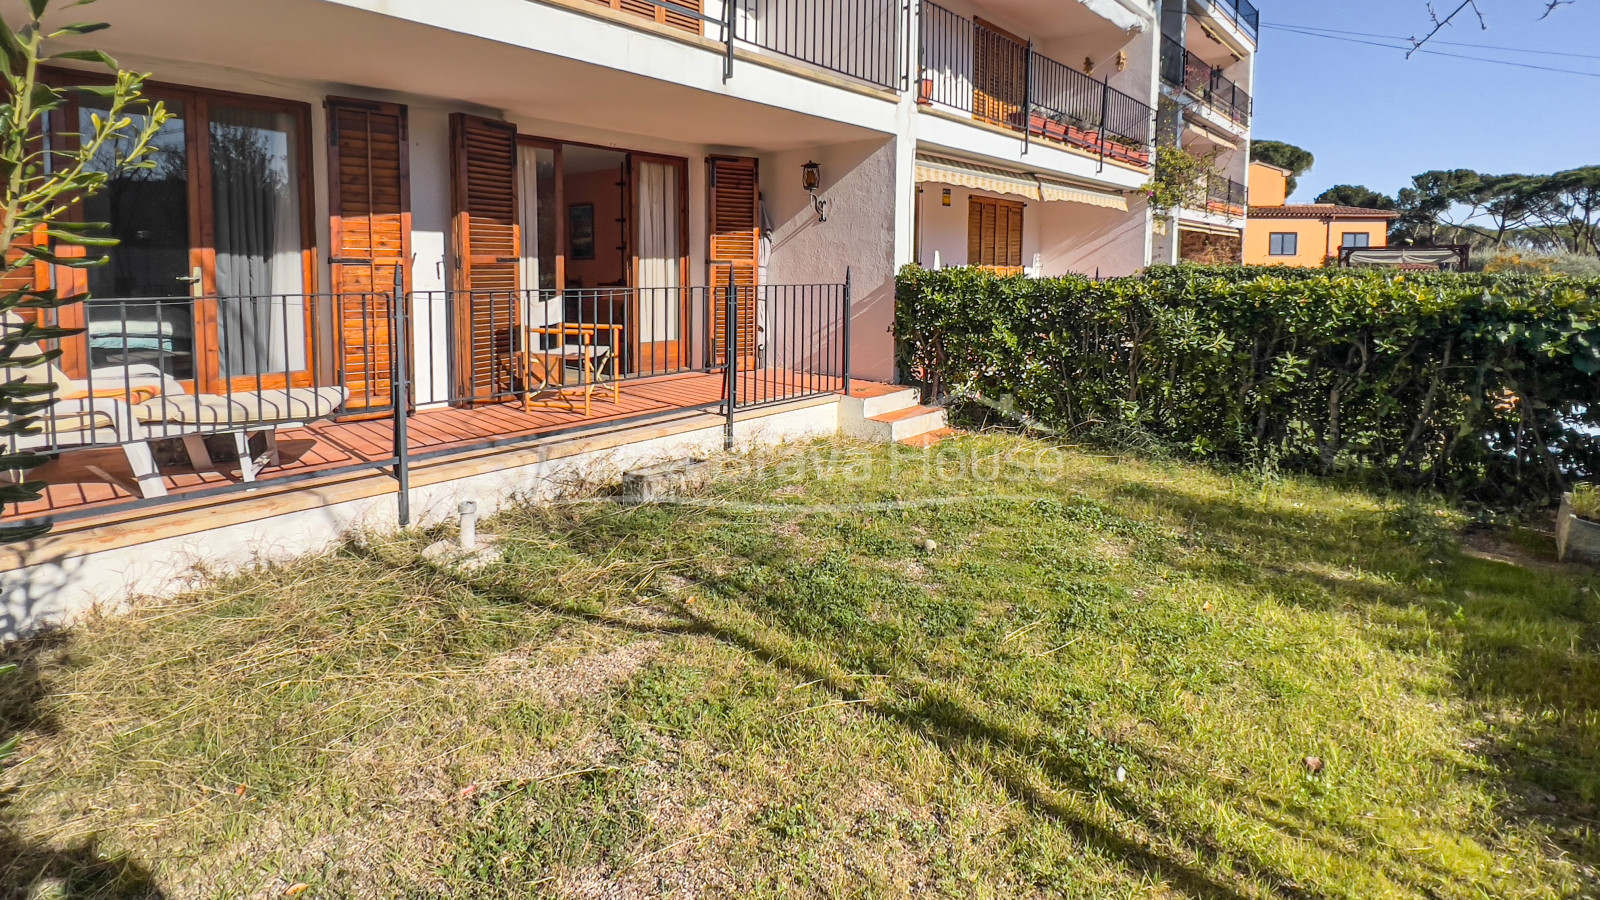 Apartment with terrace and garden for sale in Calella Palafrugell